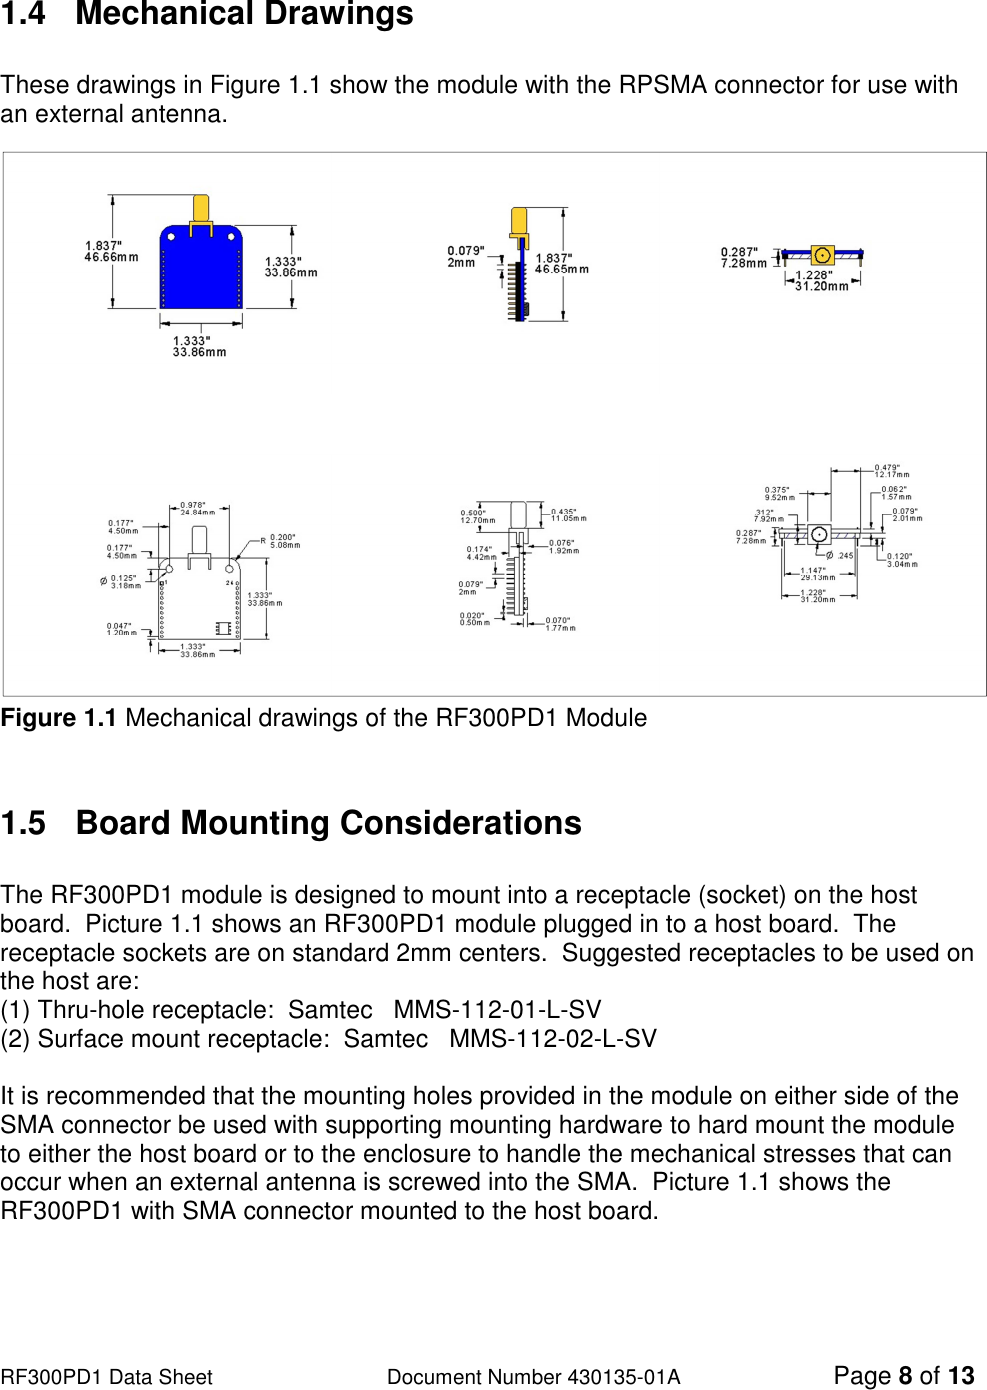                                                                                                                                                                          RF300PD1 Data Sheet                   Document Number 430135-01A Page 8 of 13  1.4   Mechanical Drawings    These drawings in Figure 1.1 show the module with the RPSMA connector for use with an external antenna. Figure 1.1 Mechanical drawings of the RF300PD1 Module   1.5  Board Mounting Considerations  The RF300PD1 module is designed to mount into a receptacle (socket) on the host board.  Picture 1.1 shows an RF300PD1 module plugged in to a host board.  The receptacle sockets are on standard 2mm centers.  Suggested receptacles to be used on the host are: (1) Thru-hole receptacle:  Samtec   MMS-112-01-L-SV   (2) Surface mount receptacle:  Samtec   MMS-112-02-L-SV    It is recommended that the mounting holes provided in the module on either side of the SMA connector be used with supporting mounting hardware to hard mount the module to either the host board or to the enclosure to handle the mechanical stresses that can occur when an external antenna is screwed into the SMA.  Picture 1.1 shows the RF300PD1 with SMA connector mounted to the host board.     